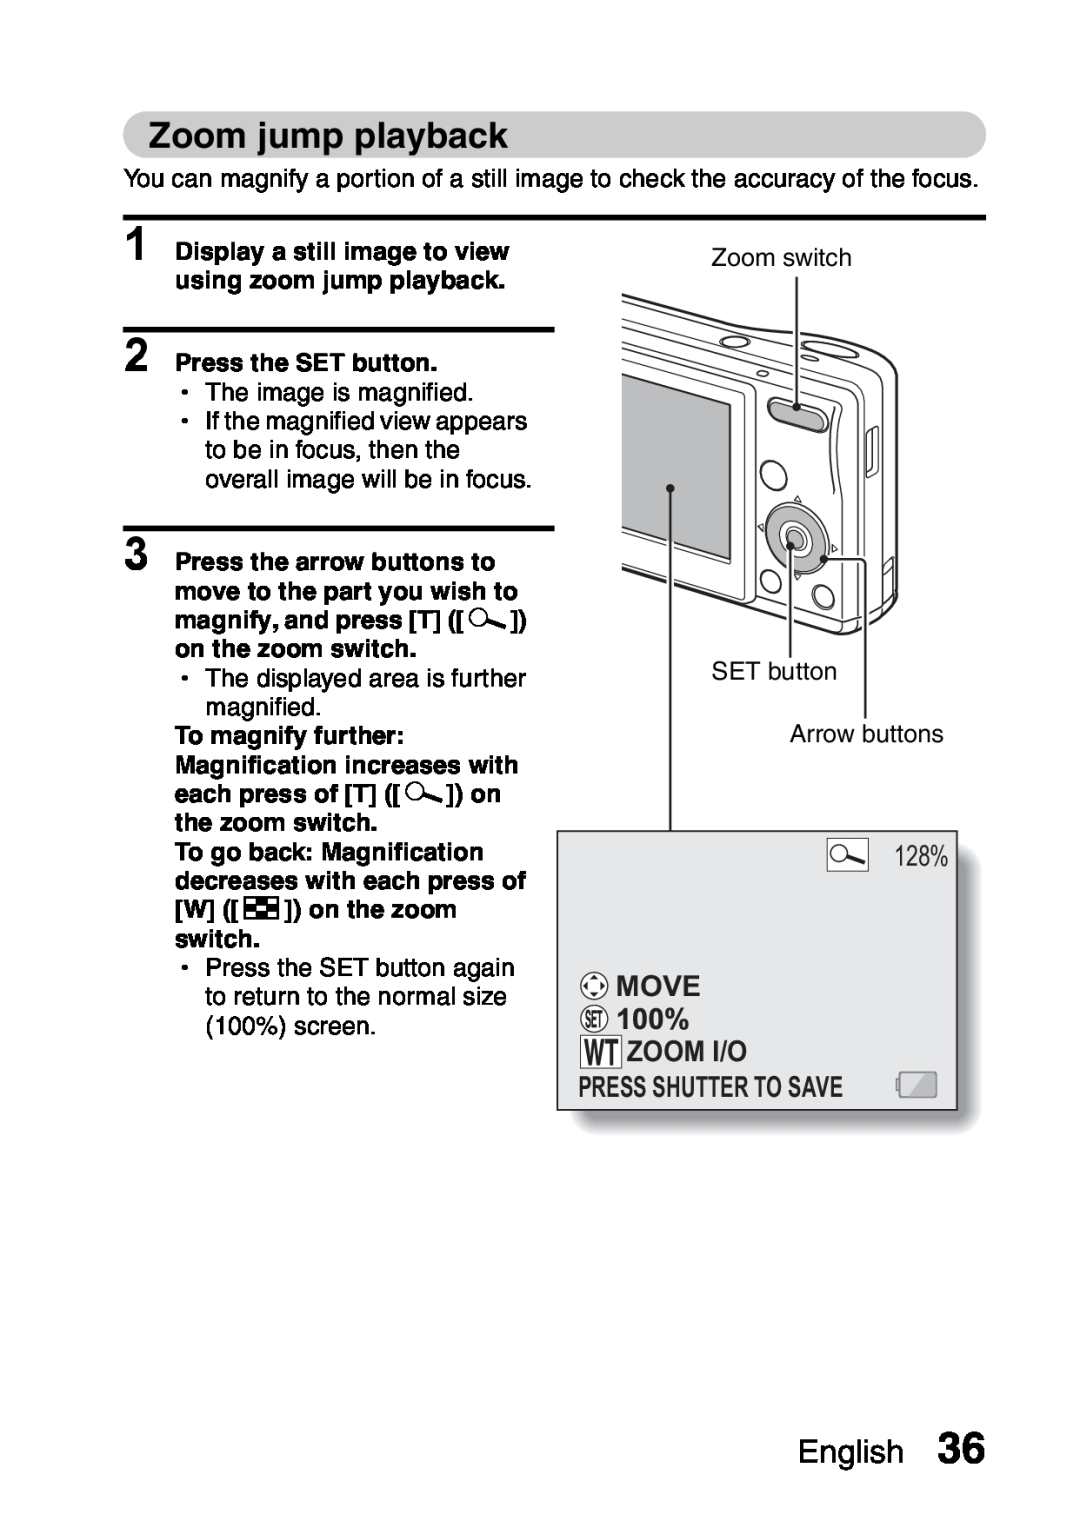 Sanyo VPC-S60 Zoom jump playback, 128%, Zoom I/O Press Shutter To Save, Move, Display a still image to view, Zoom switch 